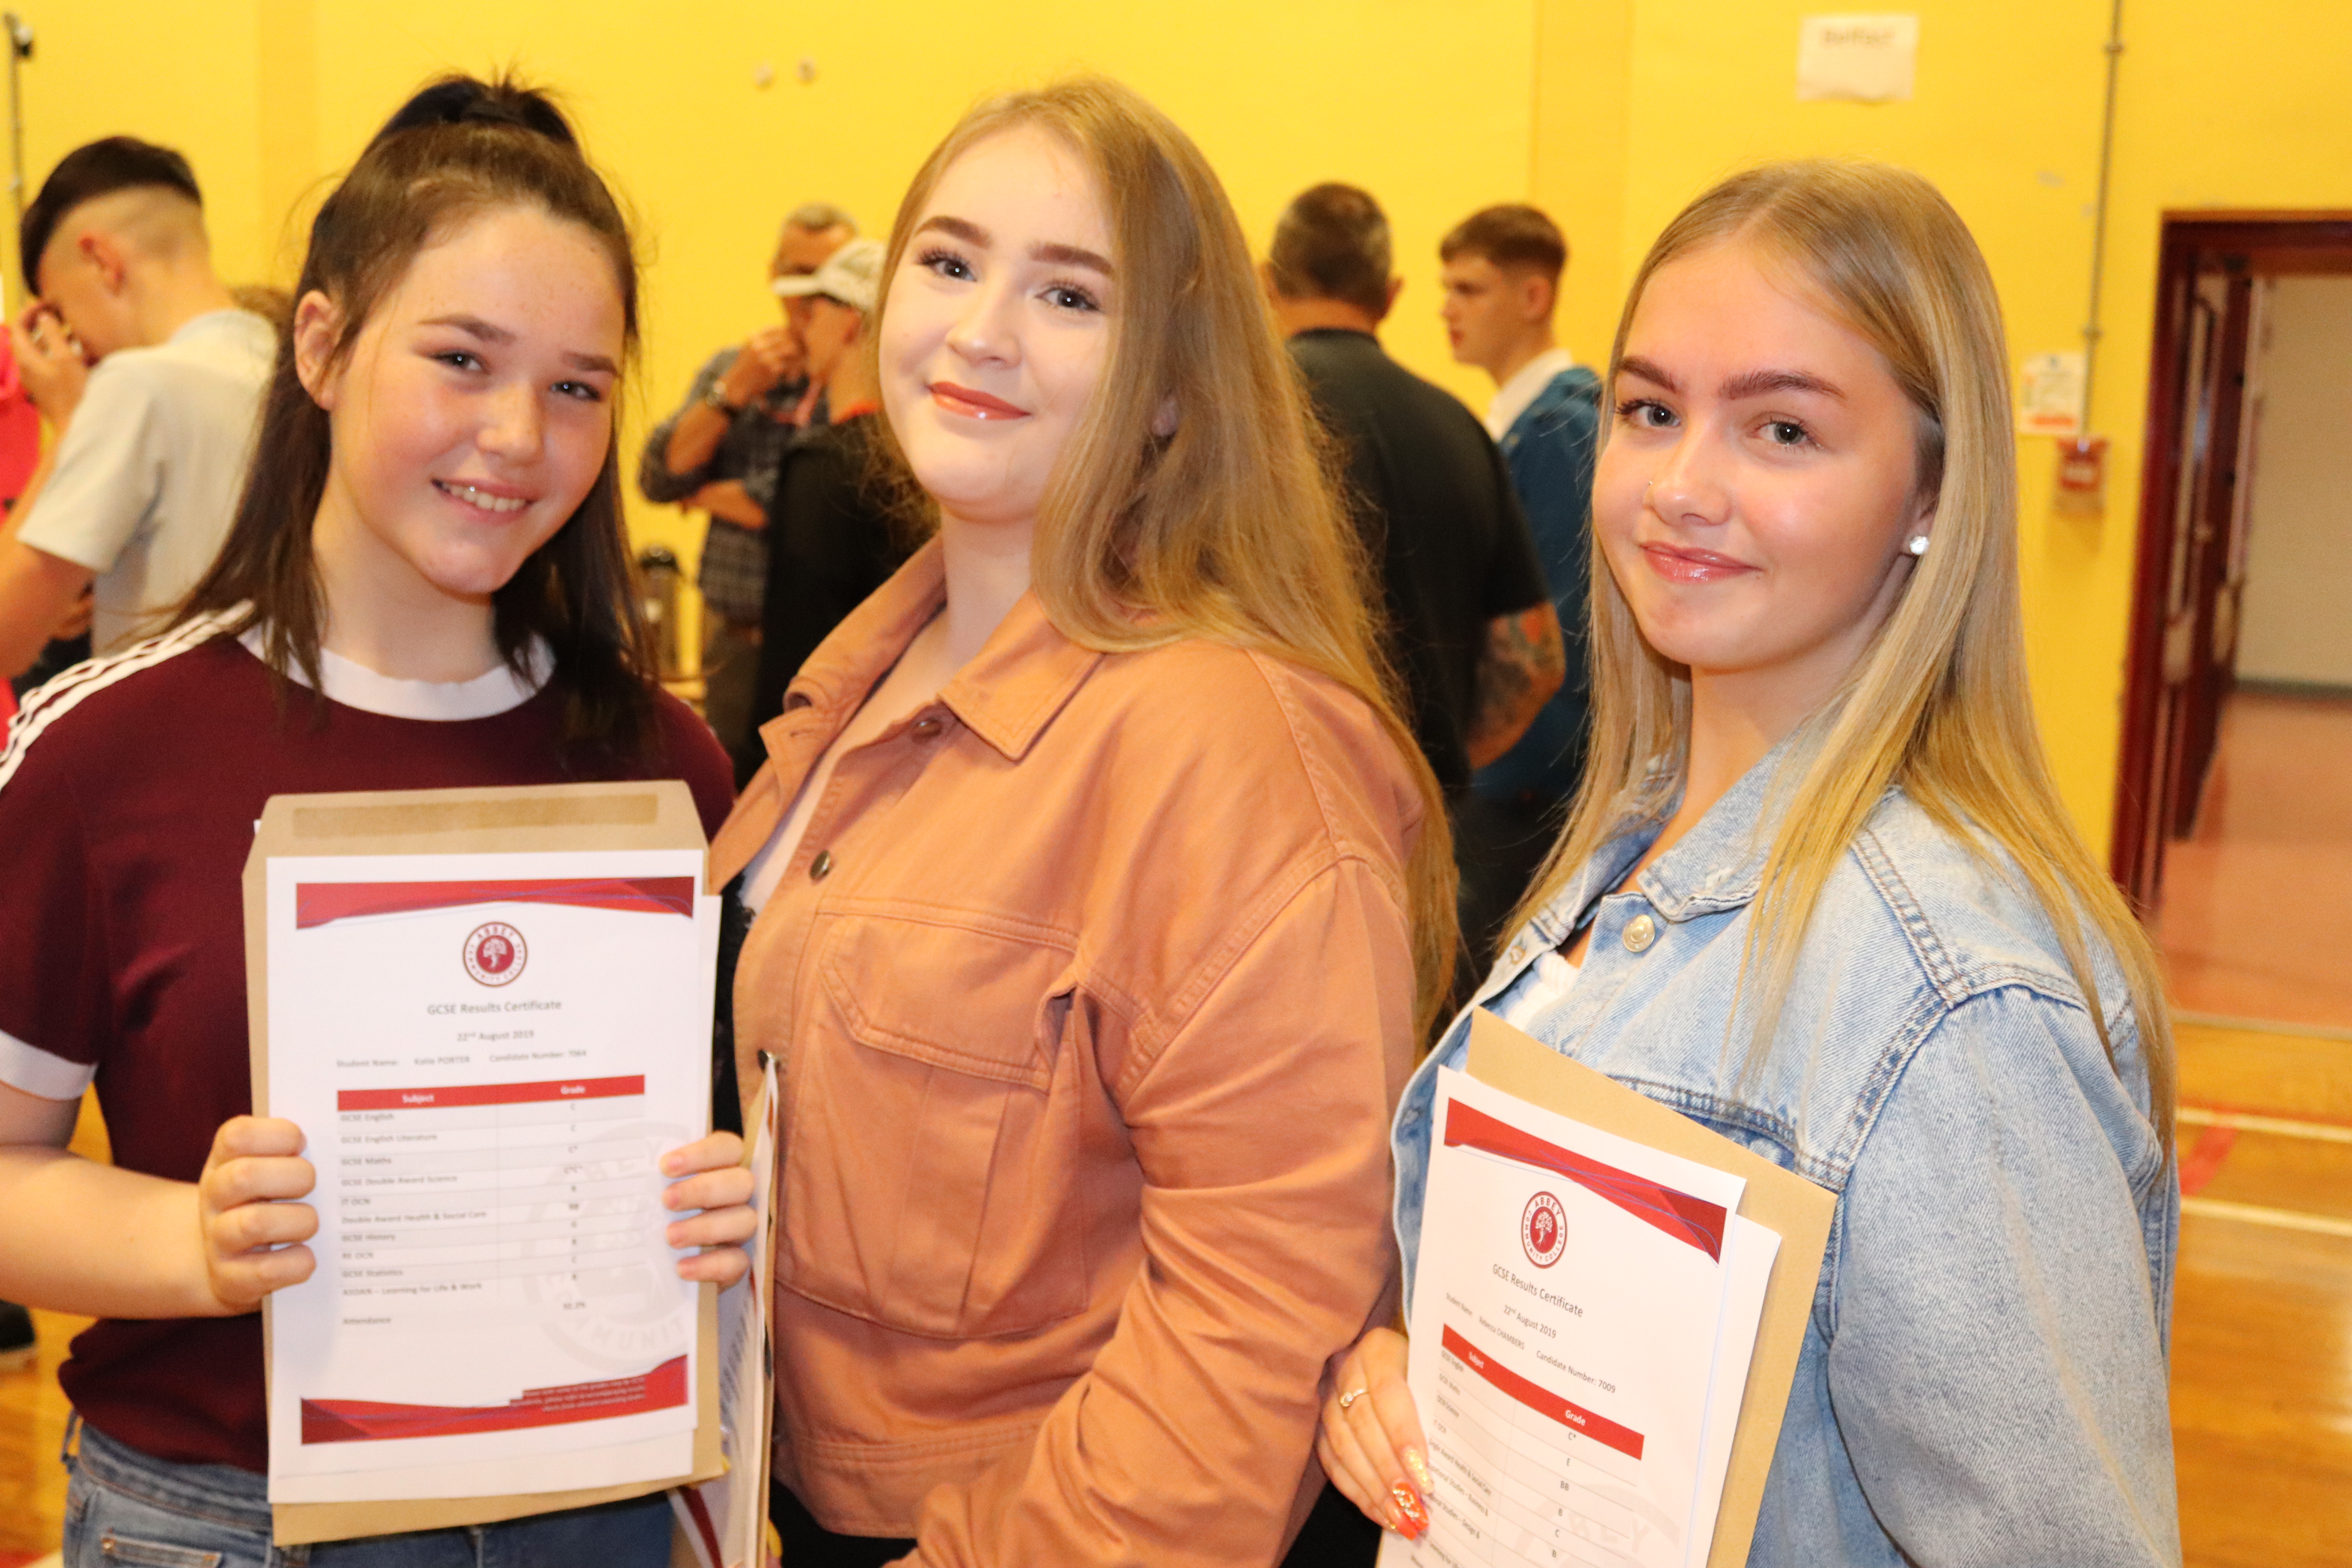 Students from Abbey Community College with their GCSE results